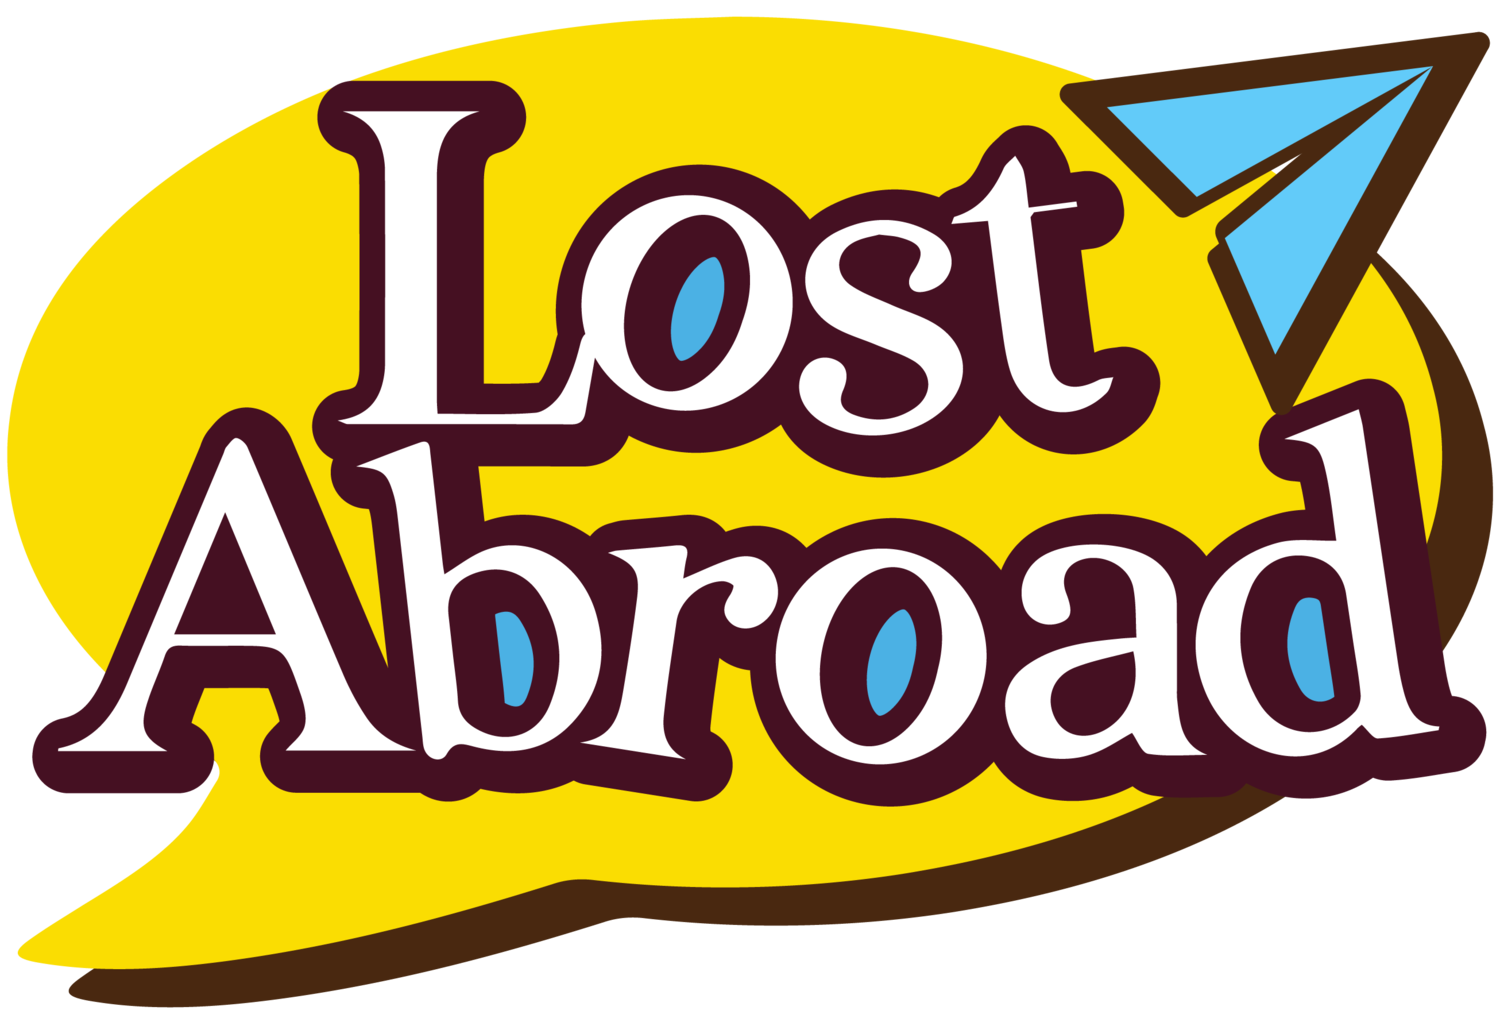 Lost Abroad